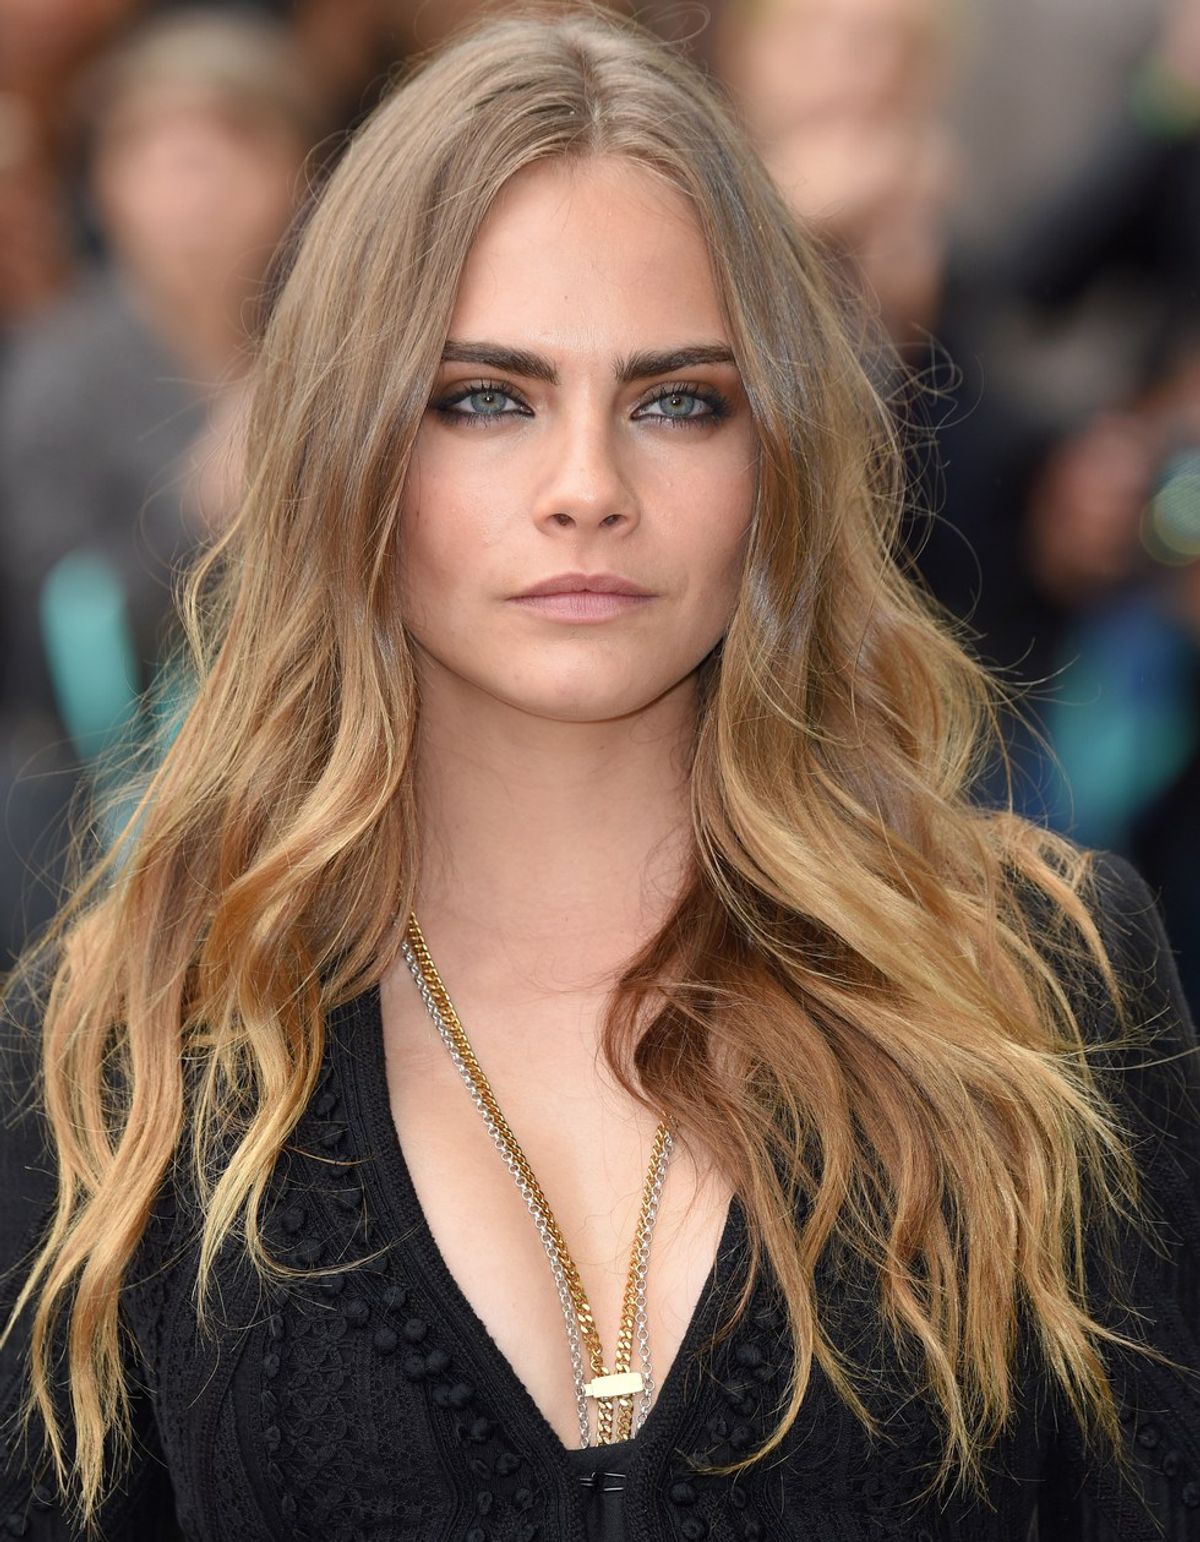 Cara Delevingne Gets A New Tattoo---What Do You Think?